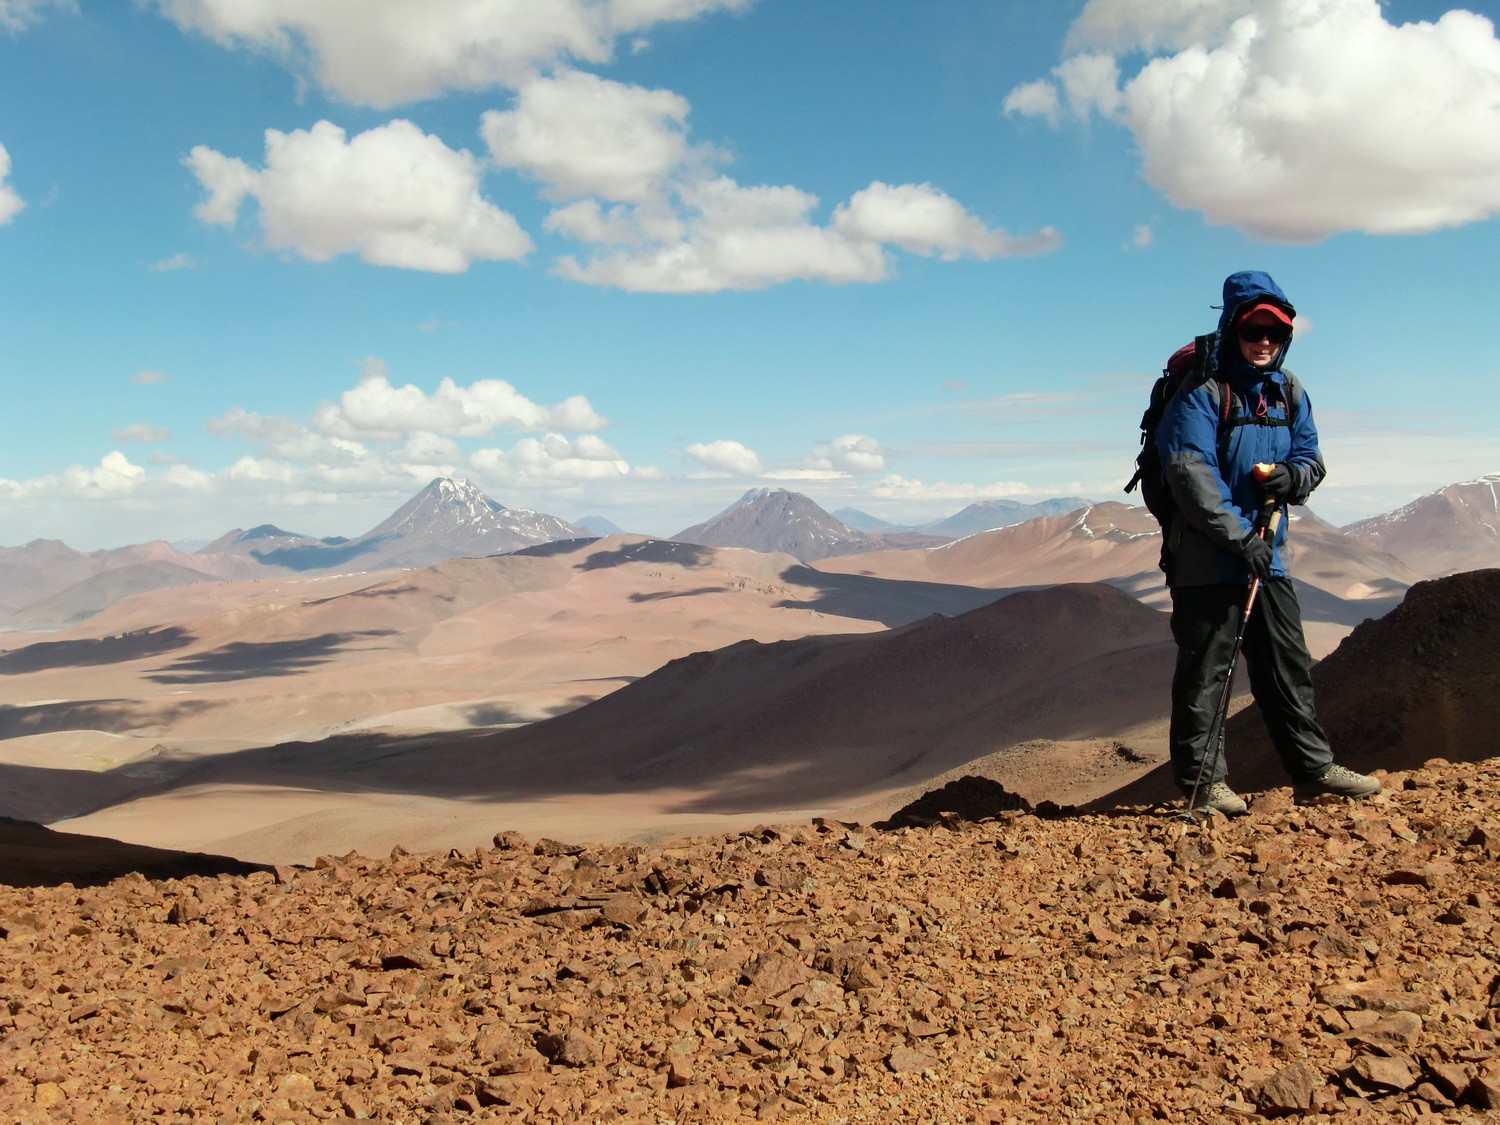 Marion on top of Cerro Incahuasi with Volcanoes Pili and Aguas Caliente in the background